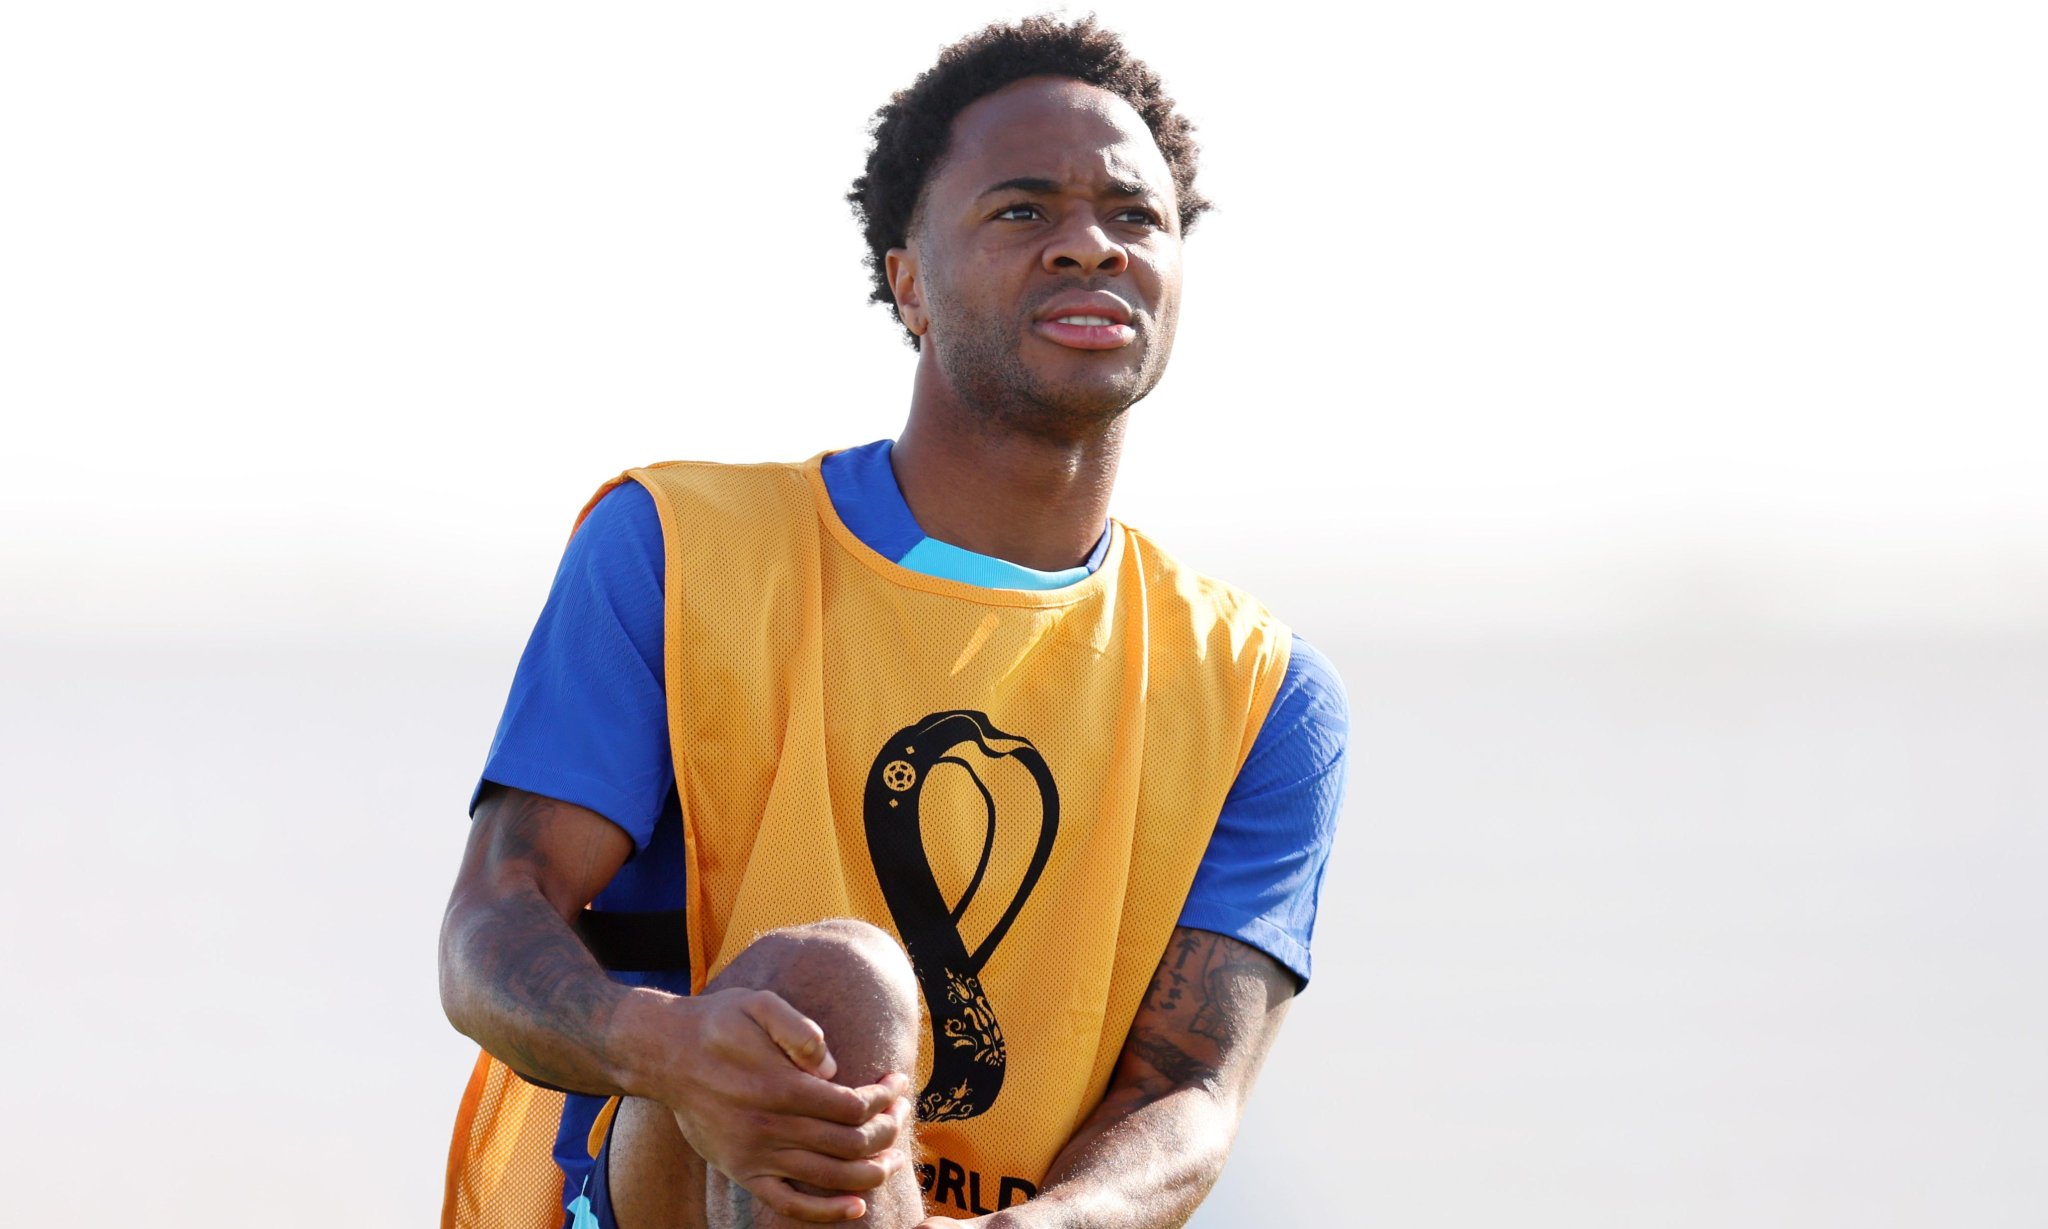 Sterling returning to World Cup gives England ‘massive lift’, says Phillips